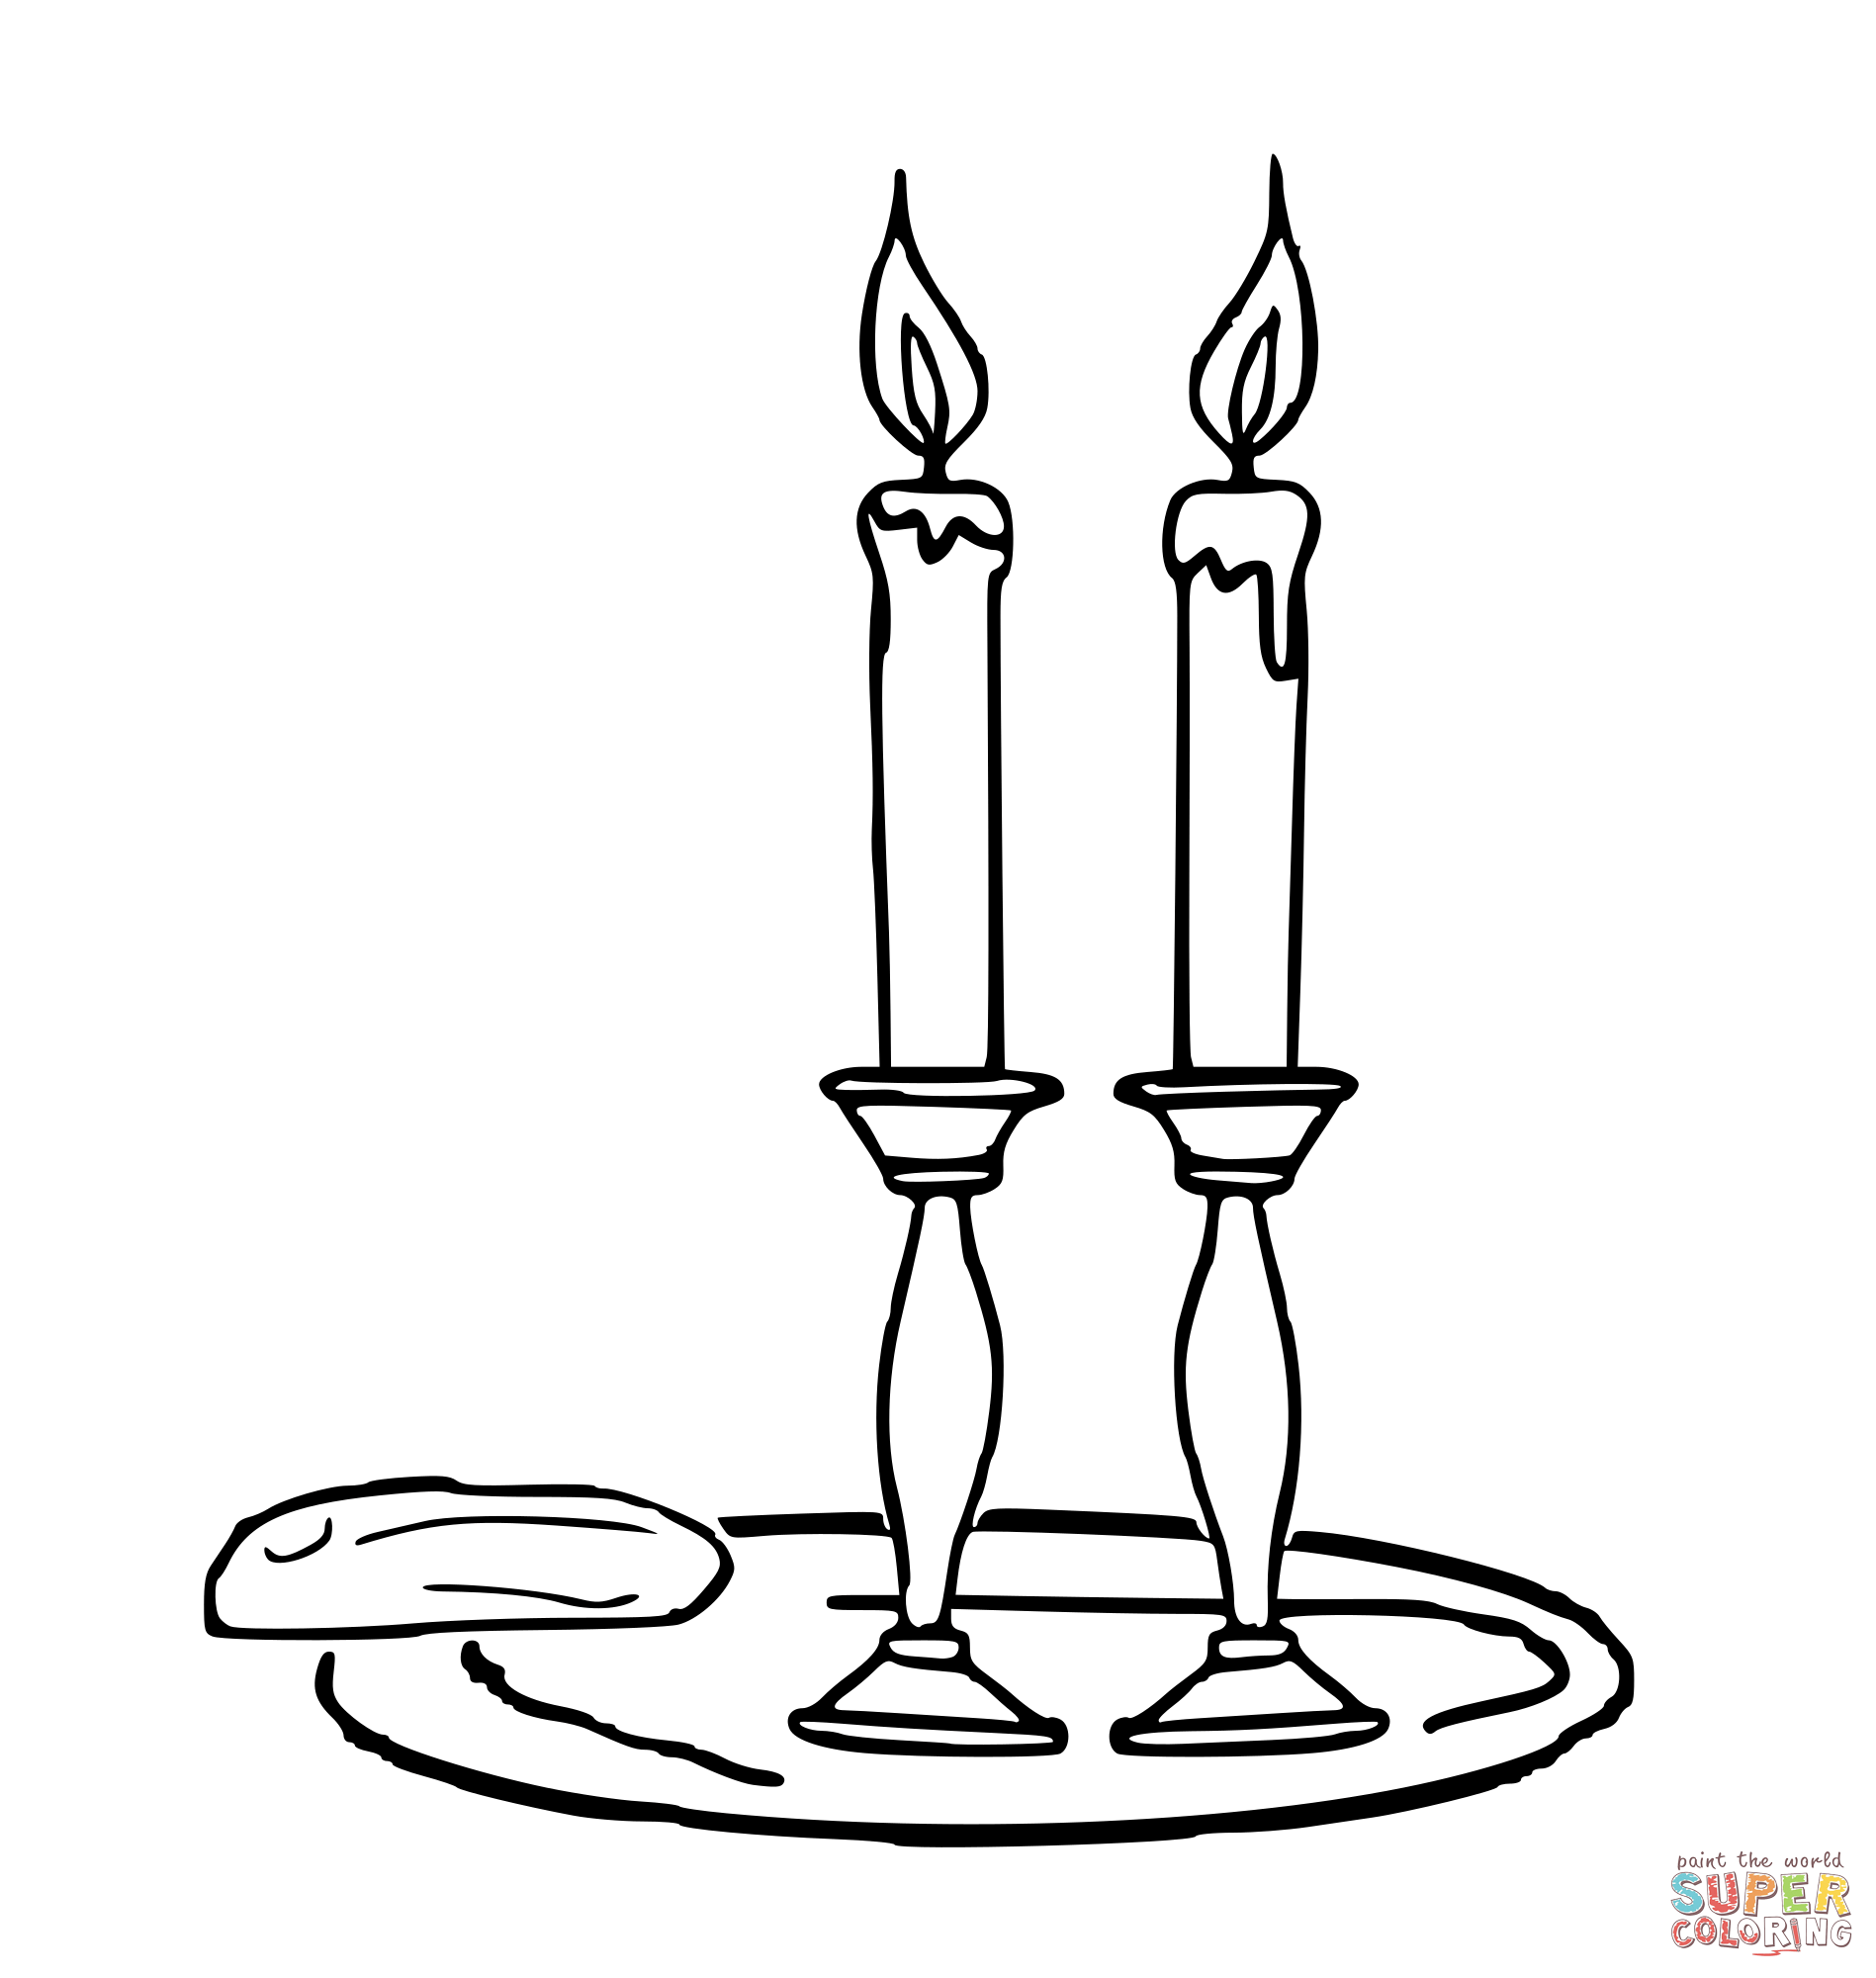 Vintage Shabbat Candles coloring page | Free Printable Coloring Pages